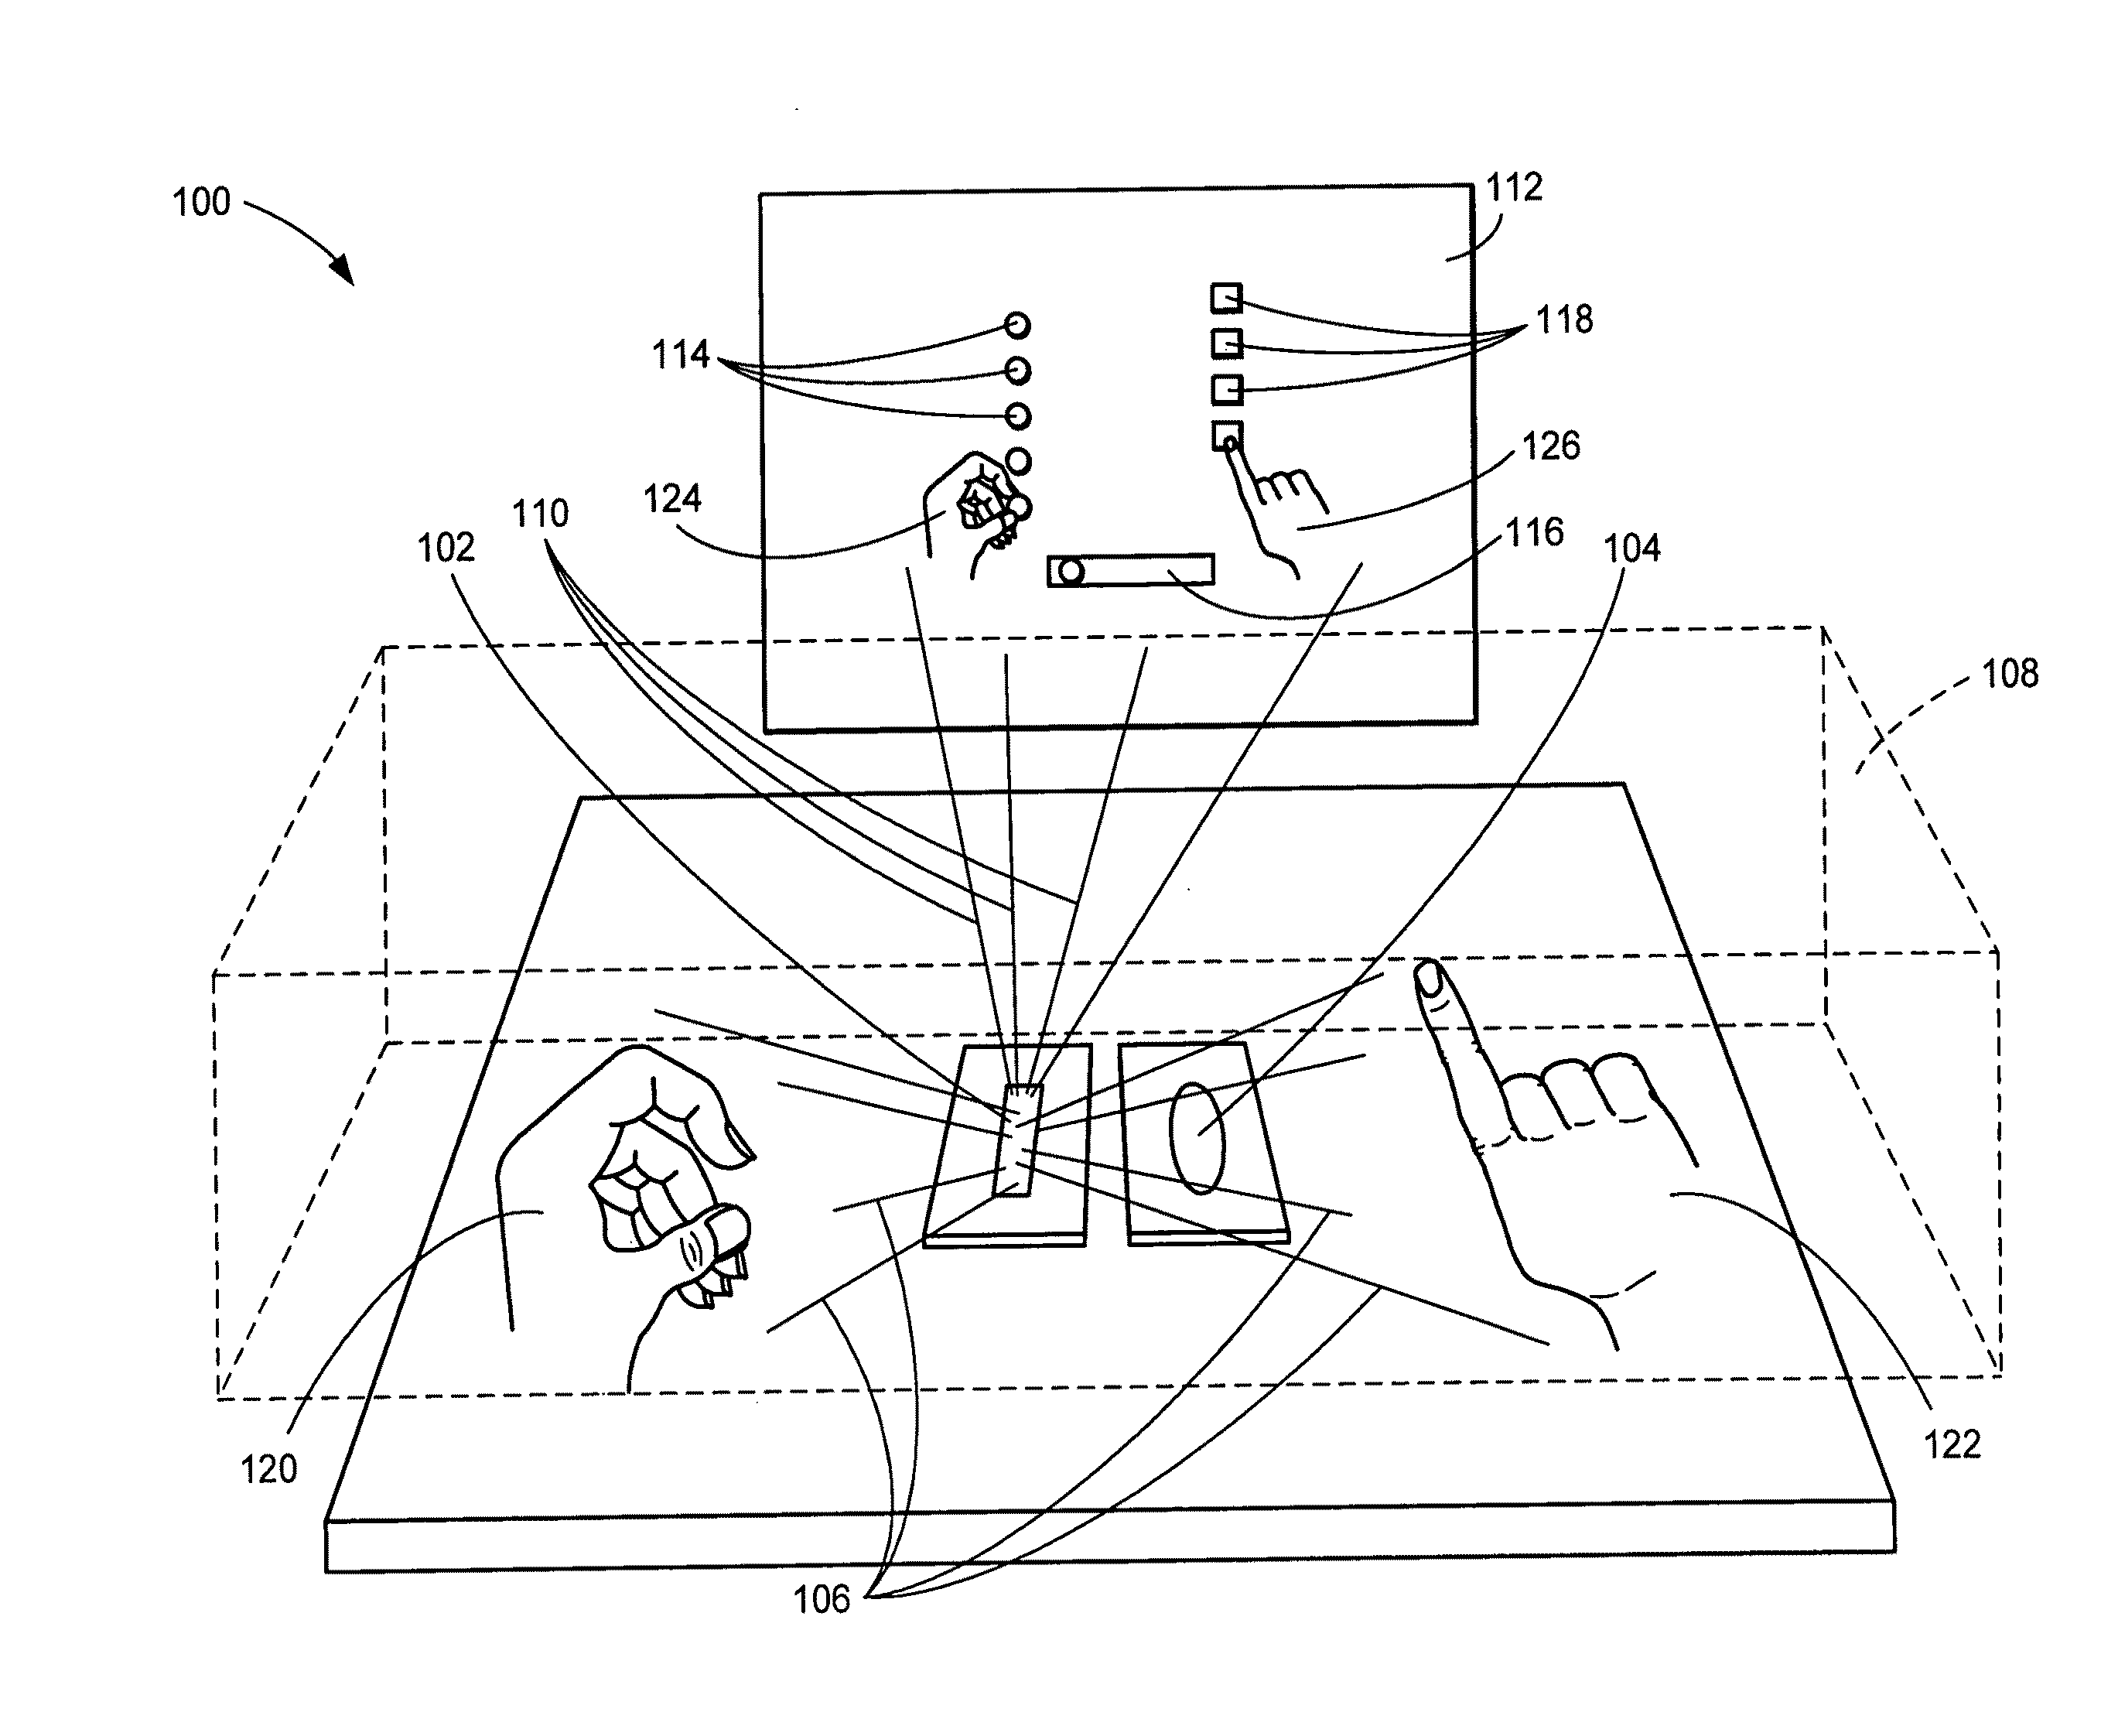 Three-dimensional imaging and display system